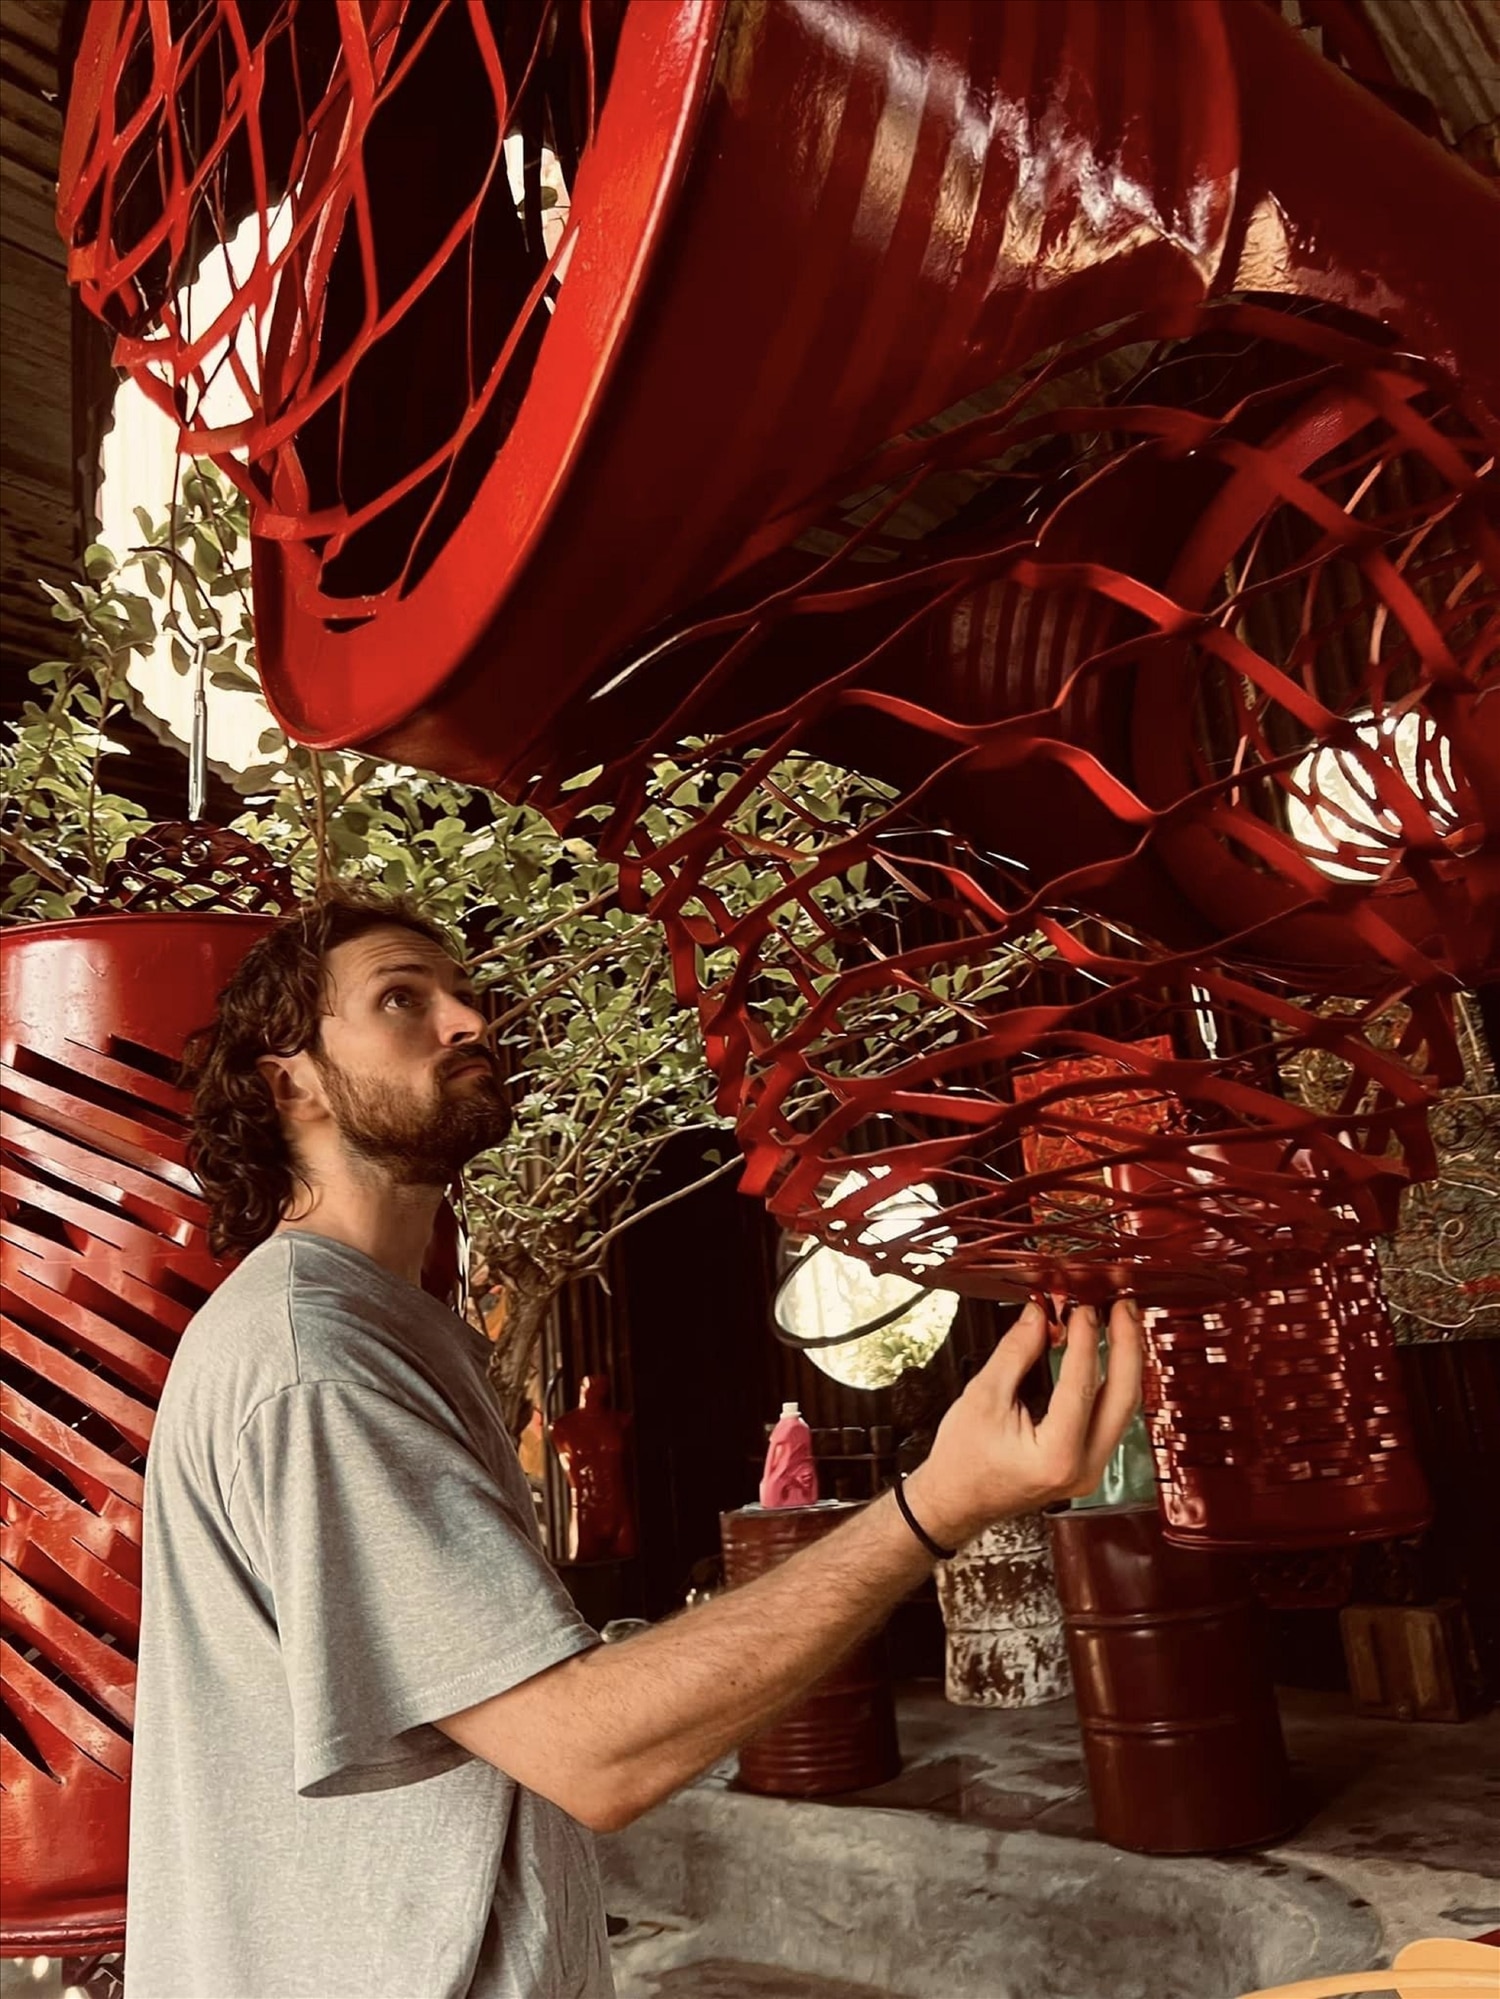 Recycled waste is both installation, sculptural, and highly interactive for environmental art.